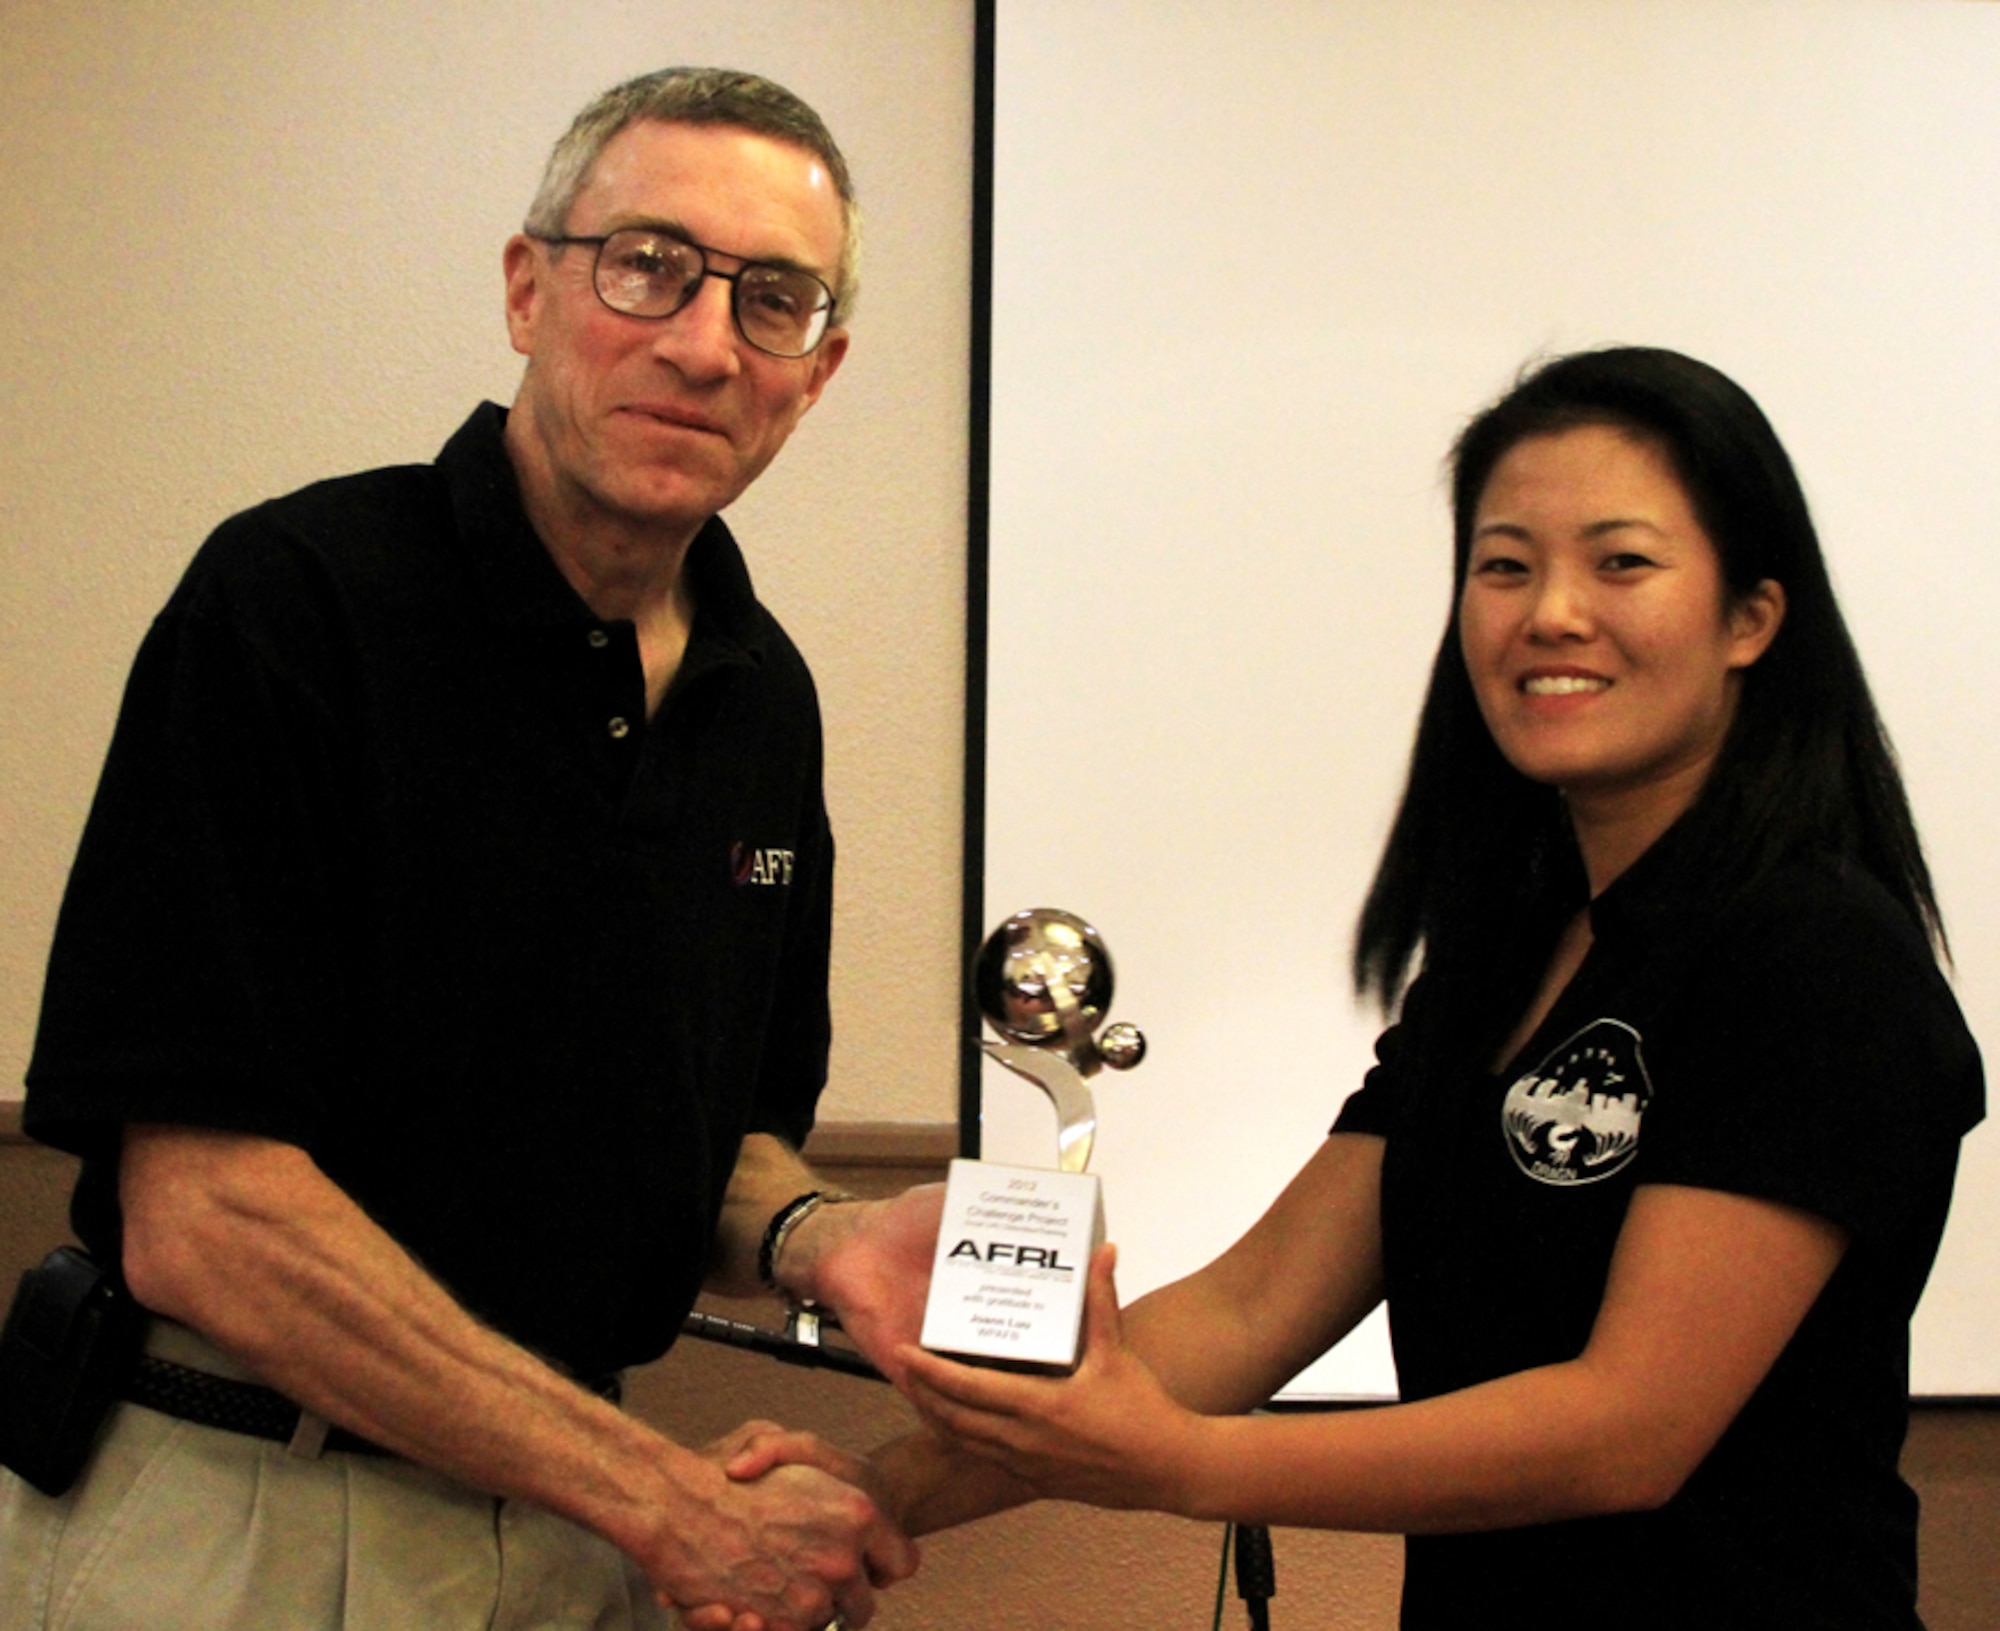 Joann Luu accepts her individual trophy from Maj. Gen. William McCasland, Air Force Research Laboratory commander, after her Air Force Materiel Command research team won the AFRL Commander’s Challenge. Luu is from the 519th Software Maintenance Squadron at Hill AFB, Utah. (Courtesy photo)